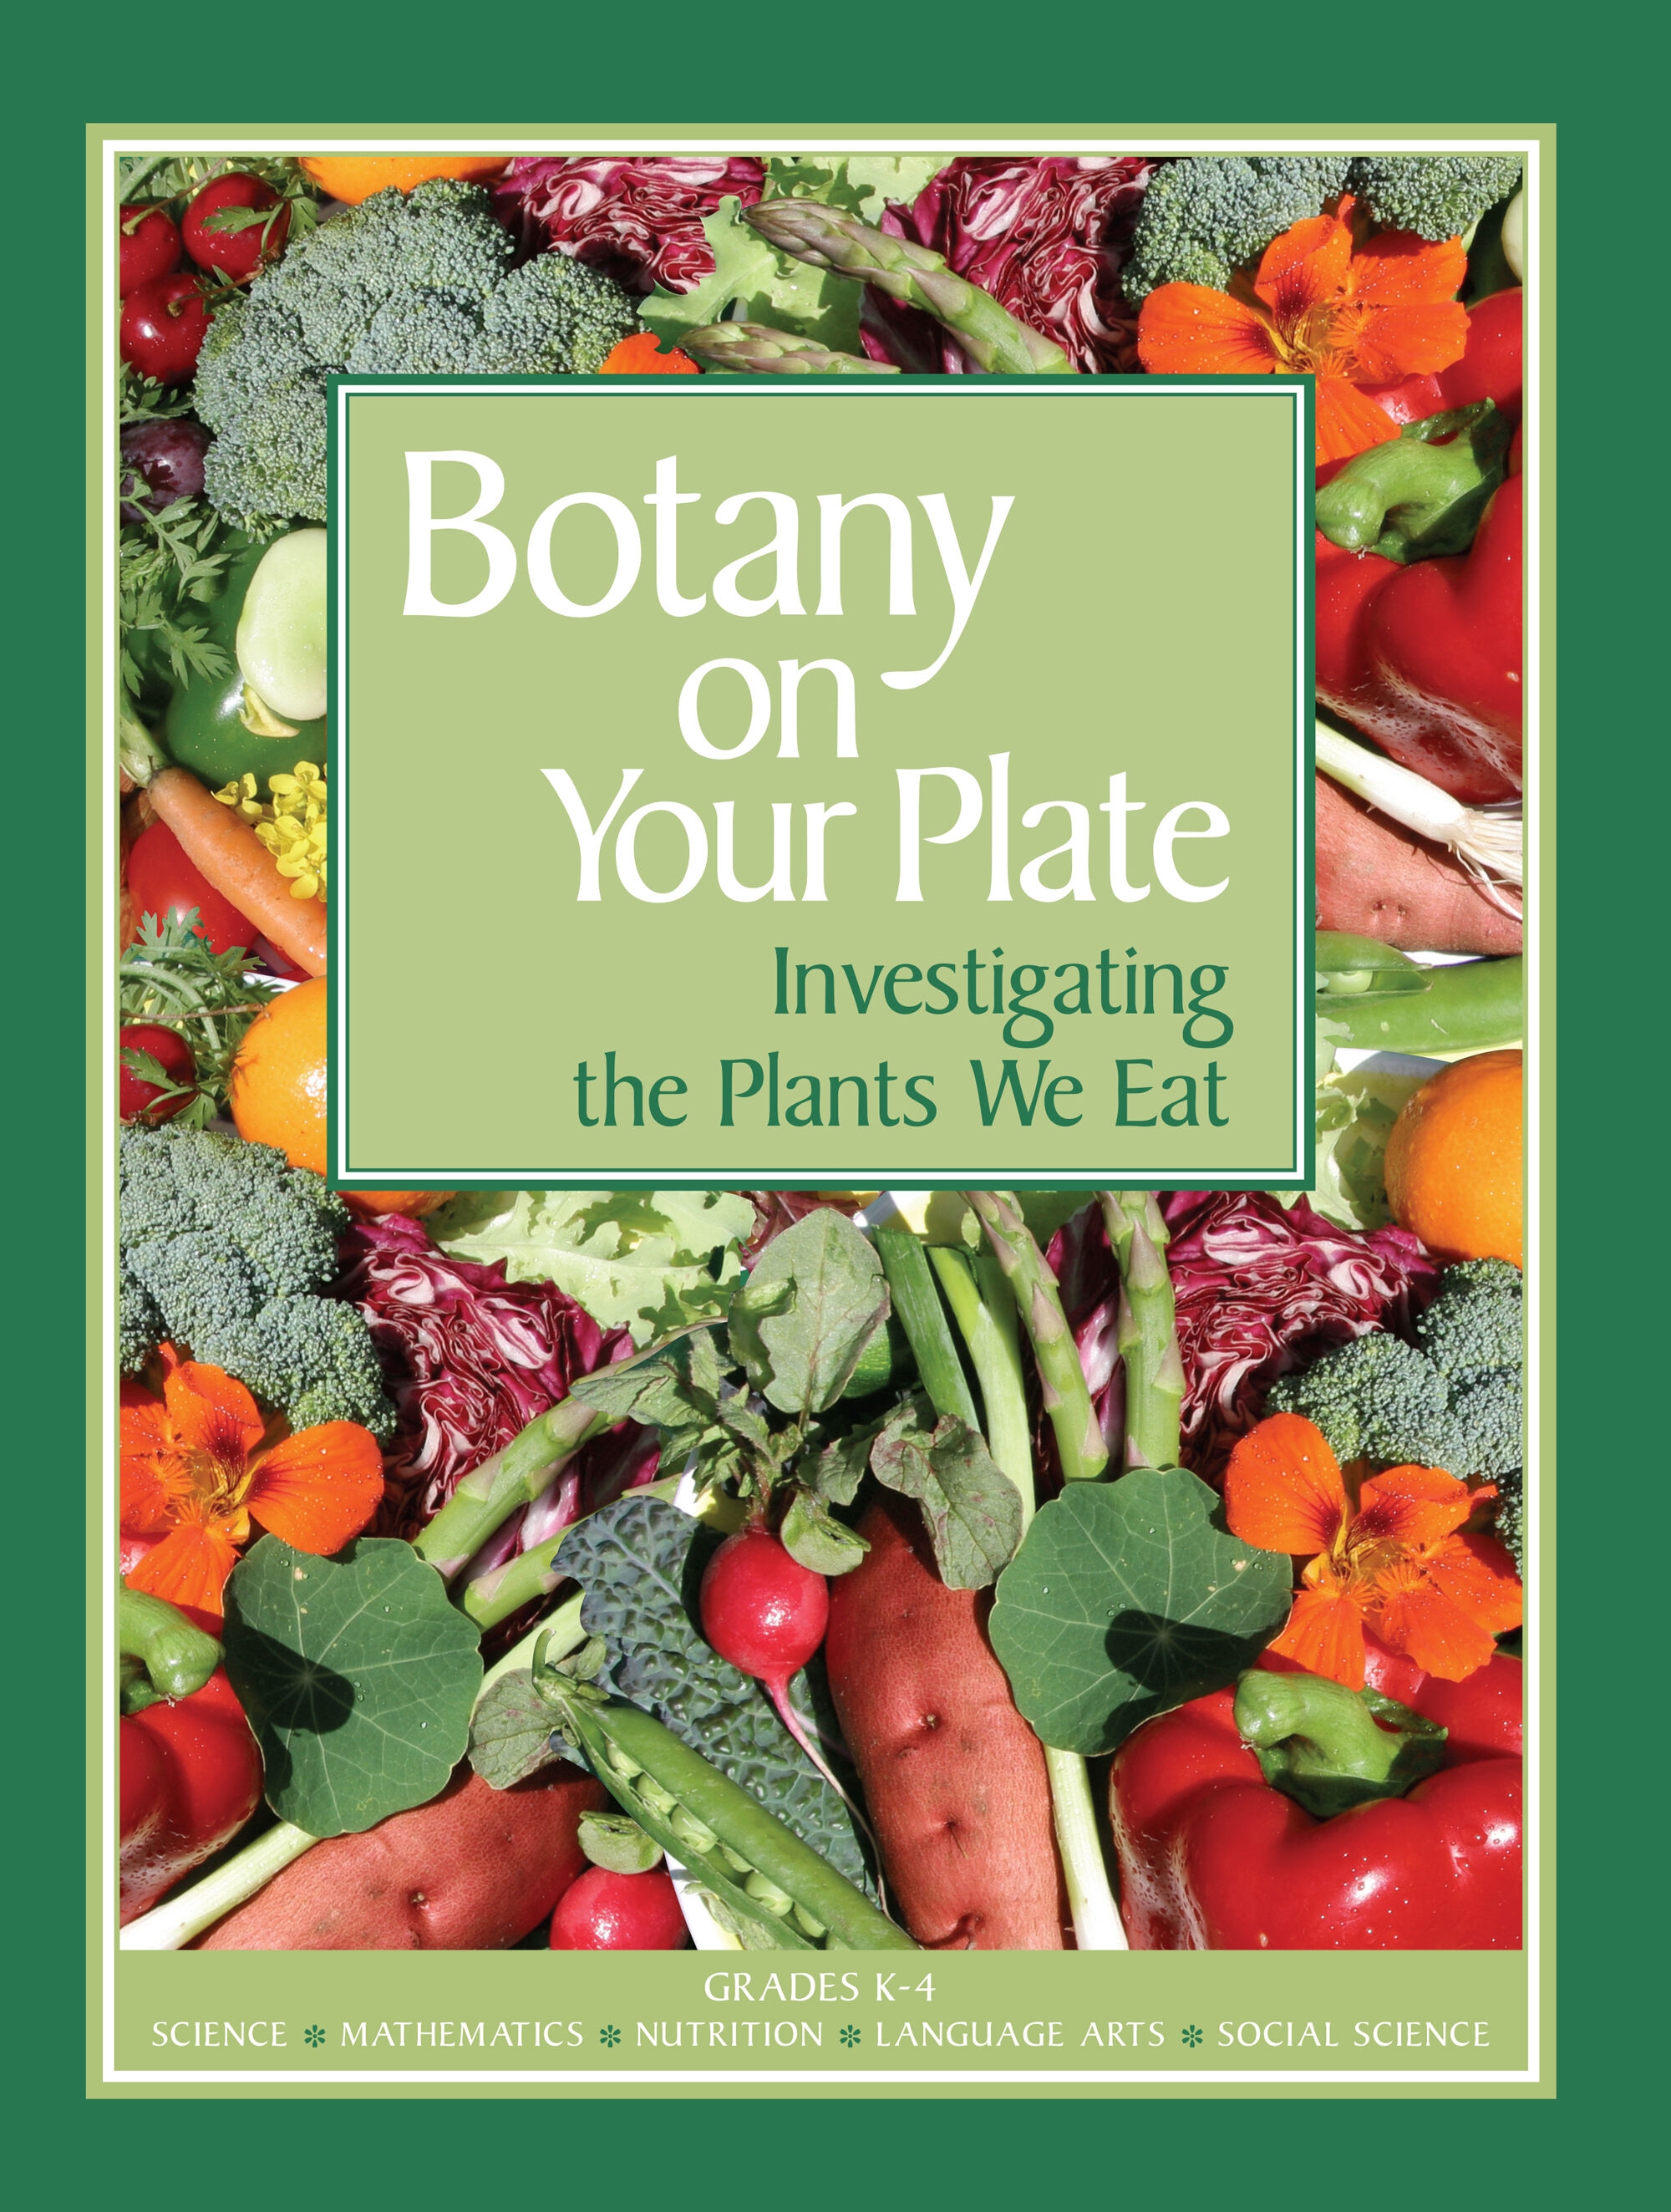 Botany on Your Plate